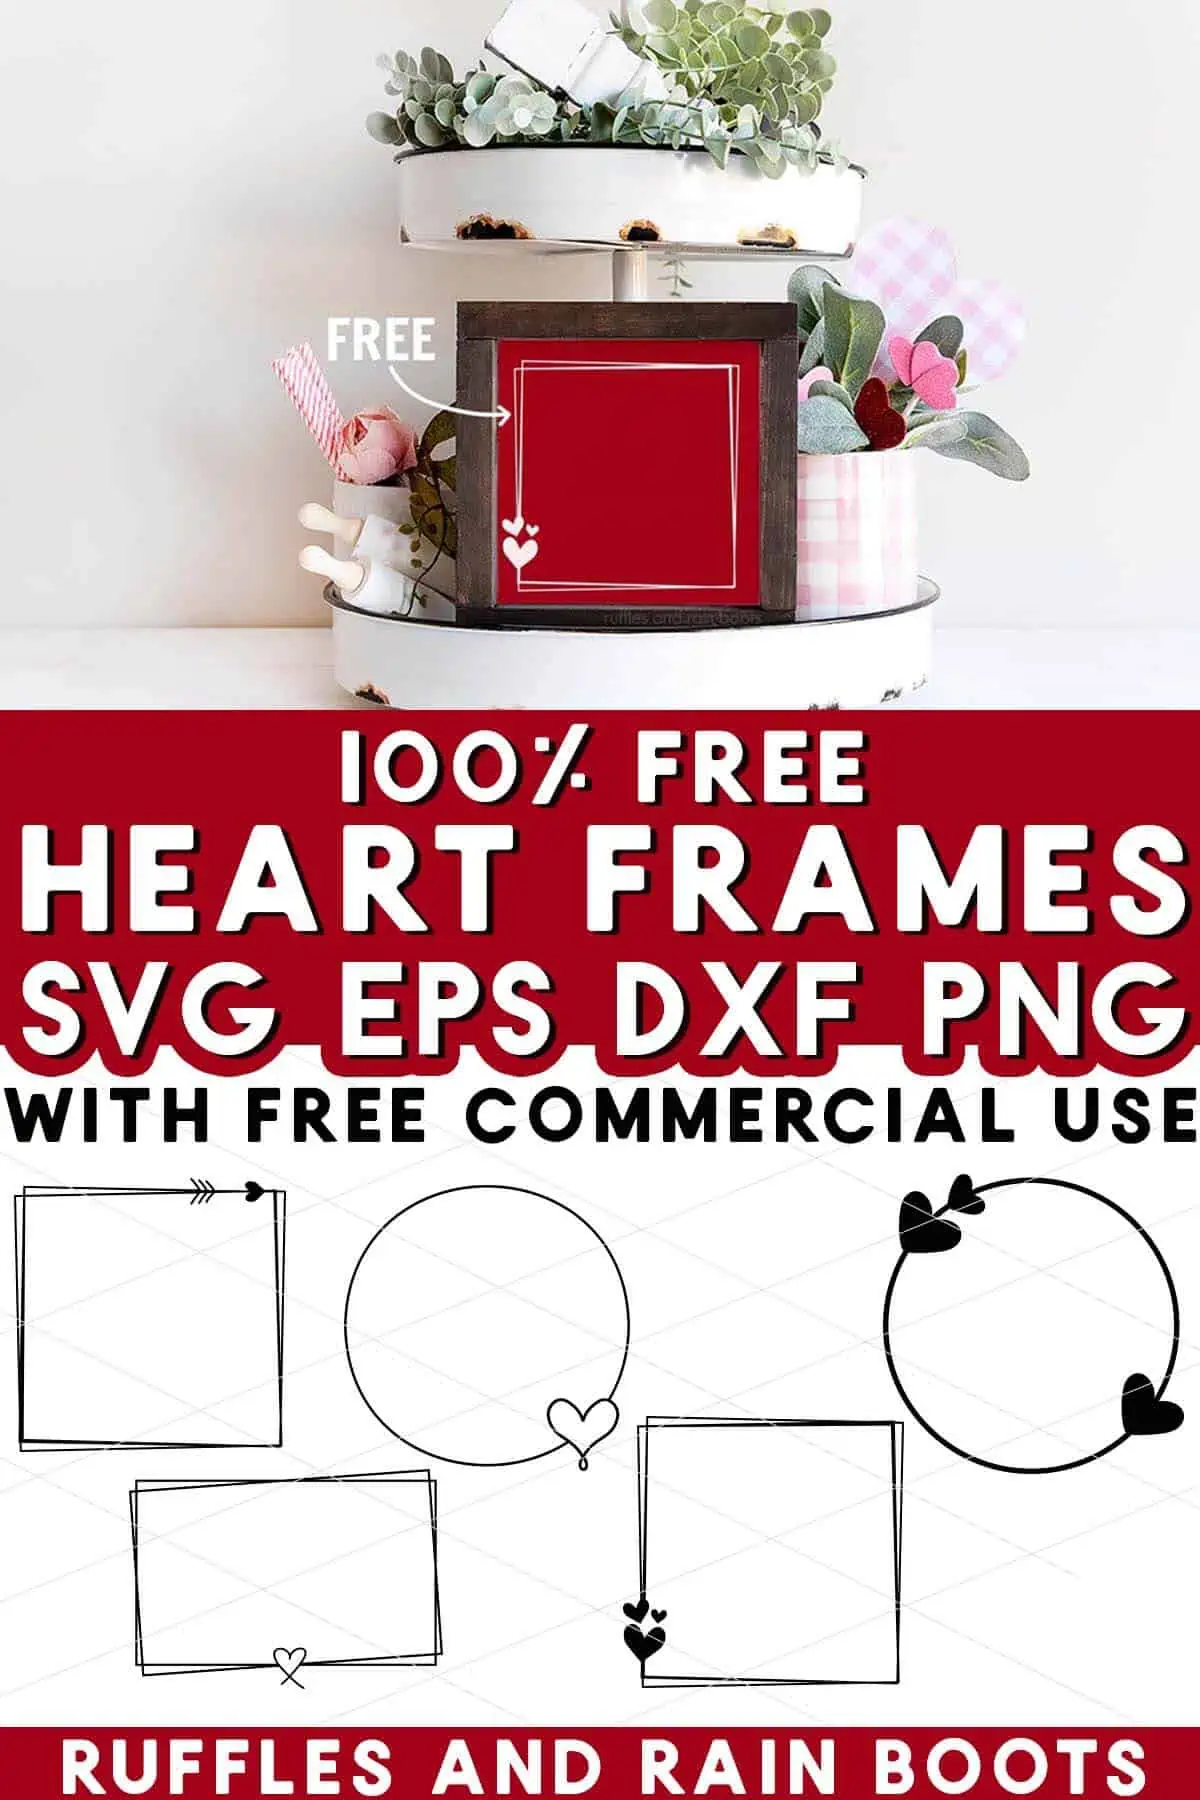 Vertical split image of heart frame used on square sign for tiered tray and text which reads free heart frames SVG with commercial license.